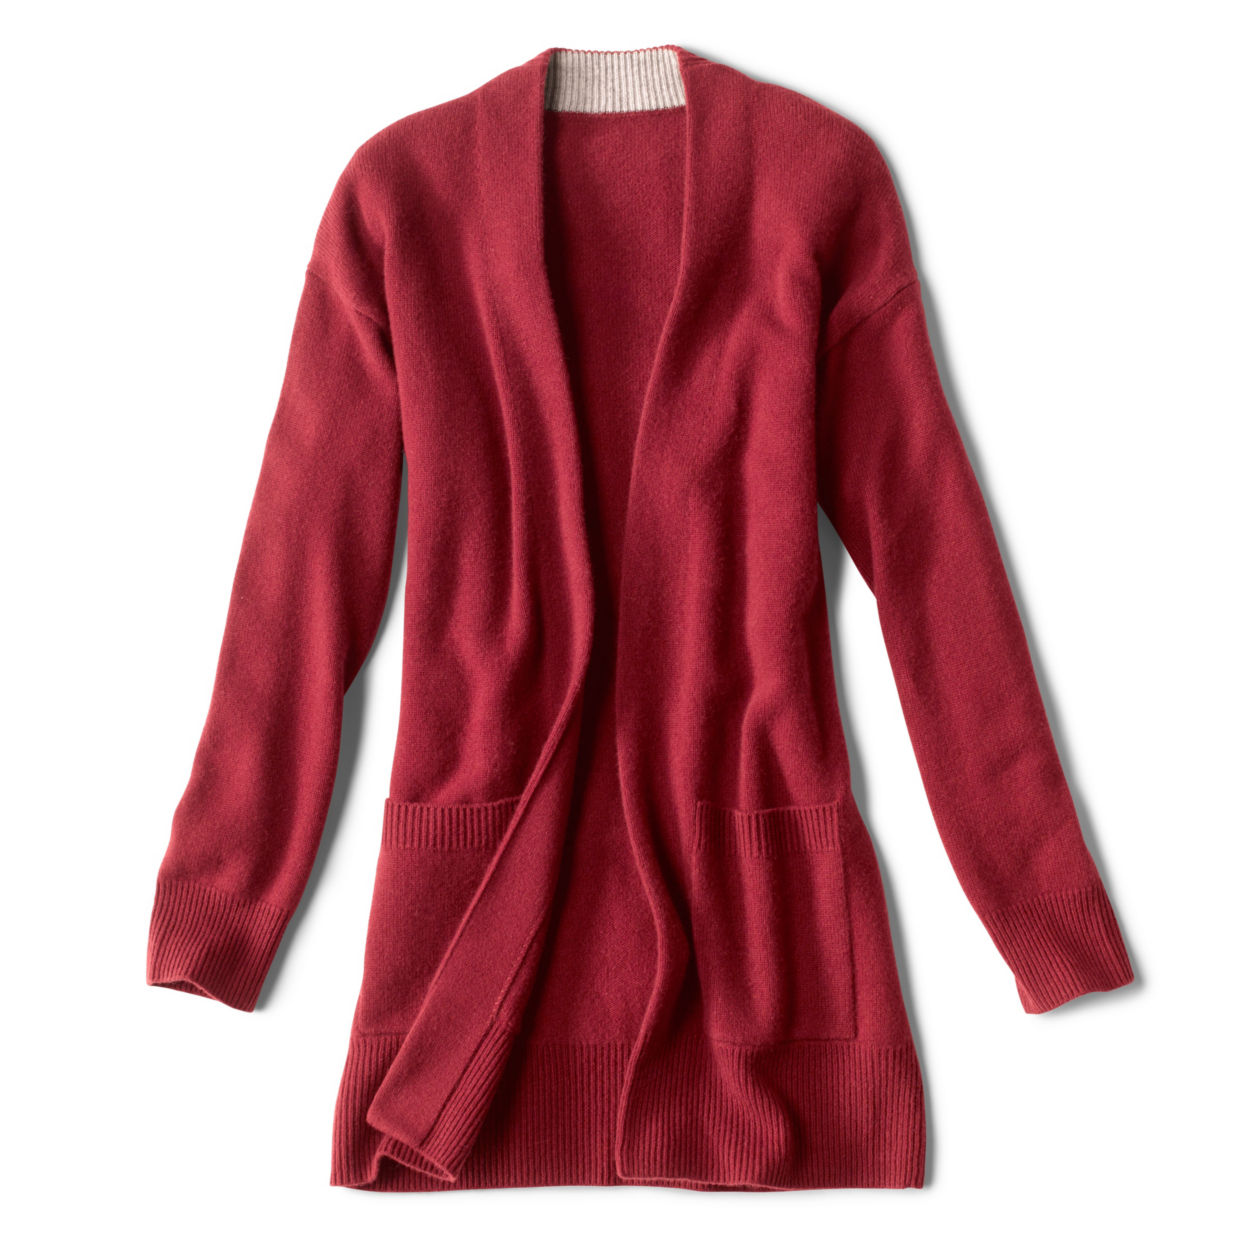 Cashmere Open Front Cardigan Sweater